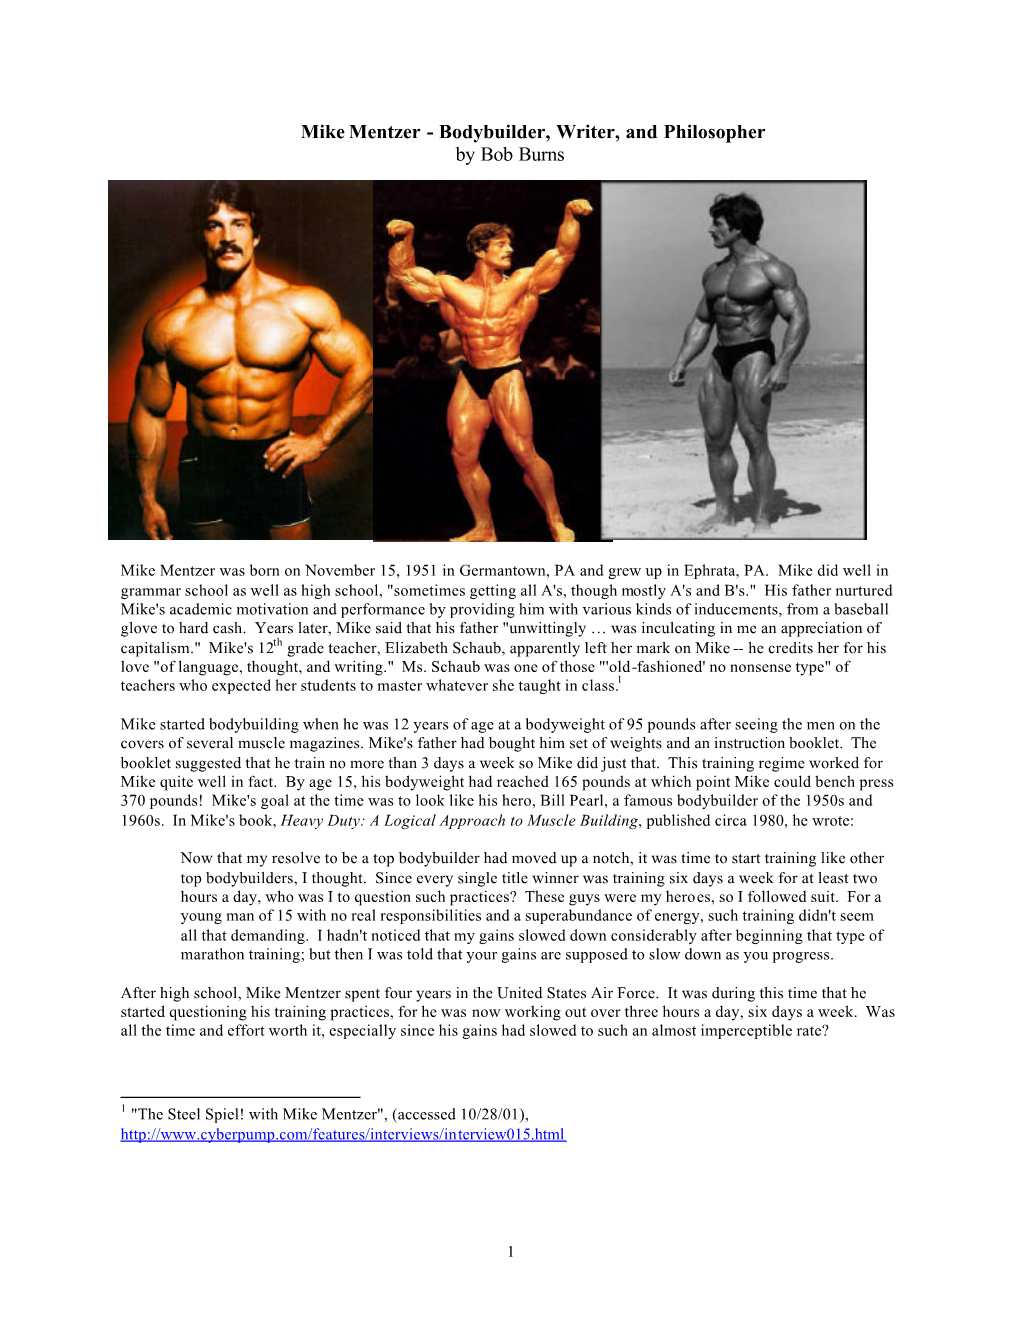 Mike Mentzer - Bodybuilder, Writer, and Philosopher by Bob Burns